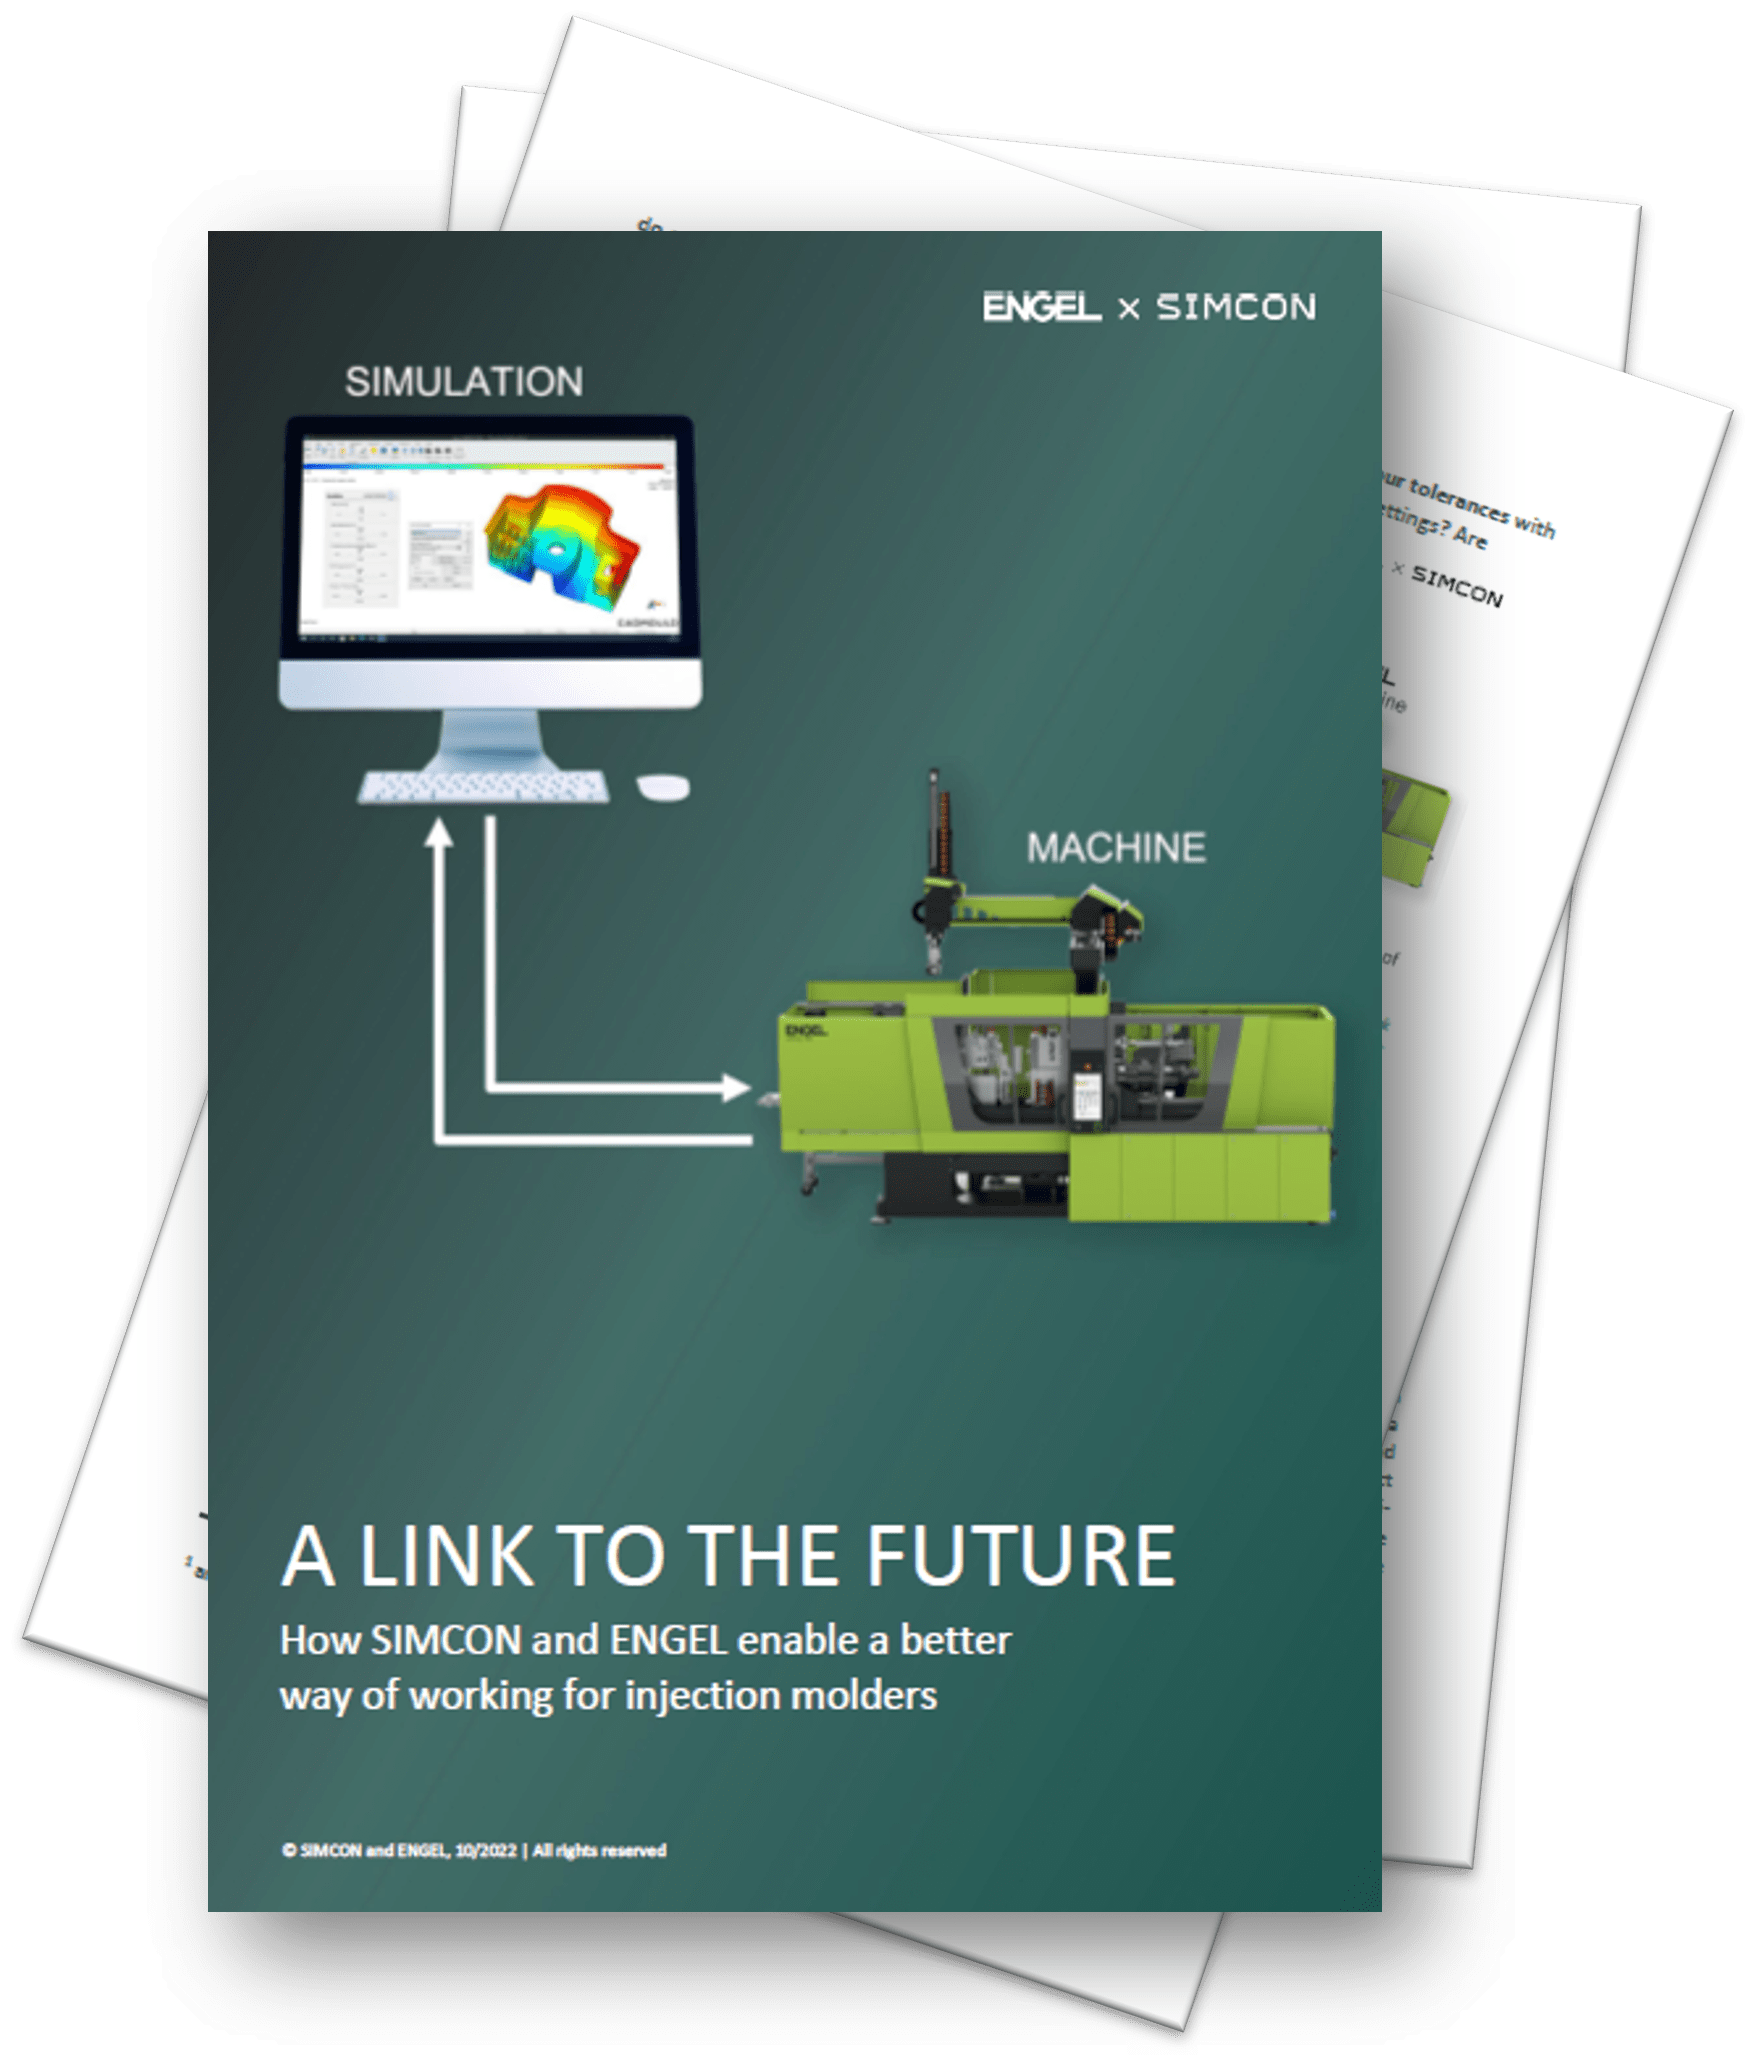 Link to the future: How ENGEL & SIMCON enable a better way of working